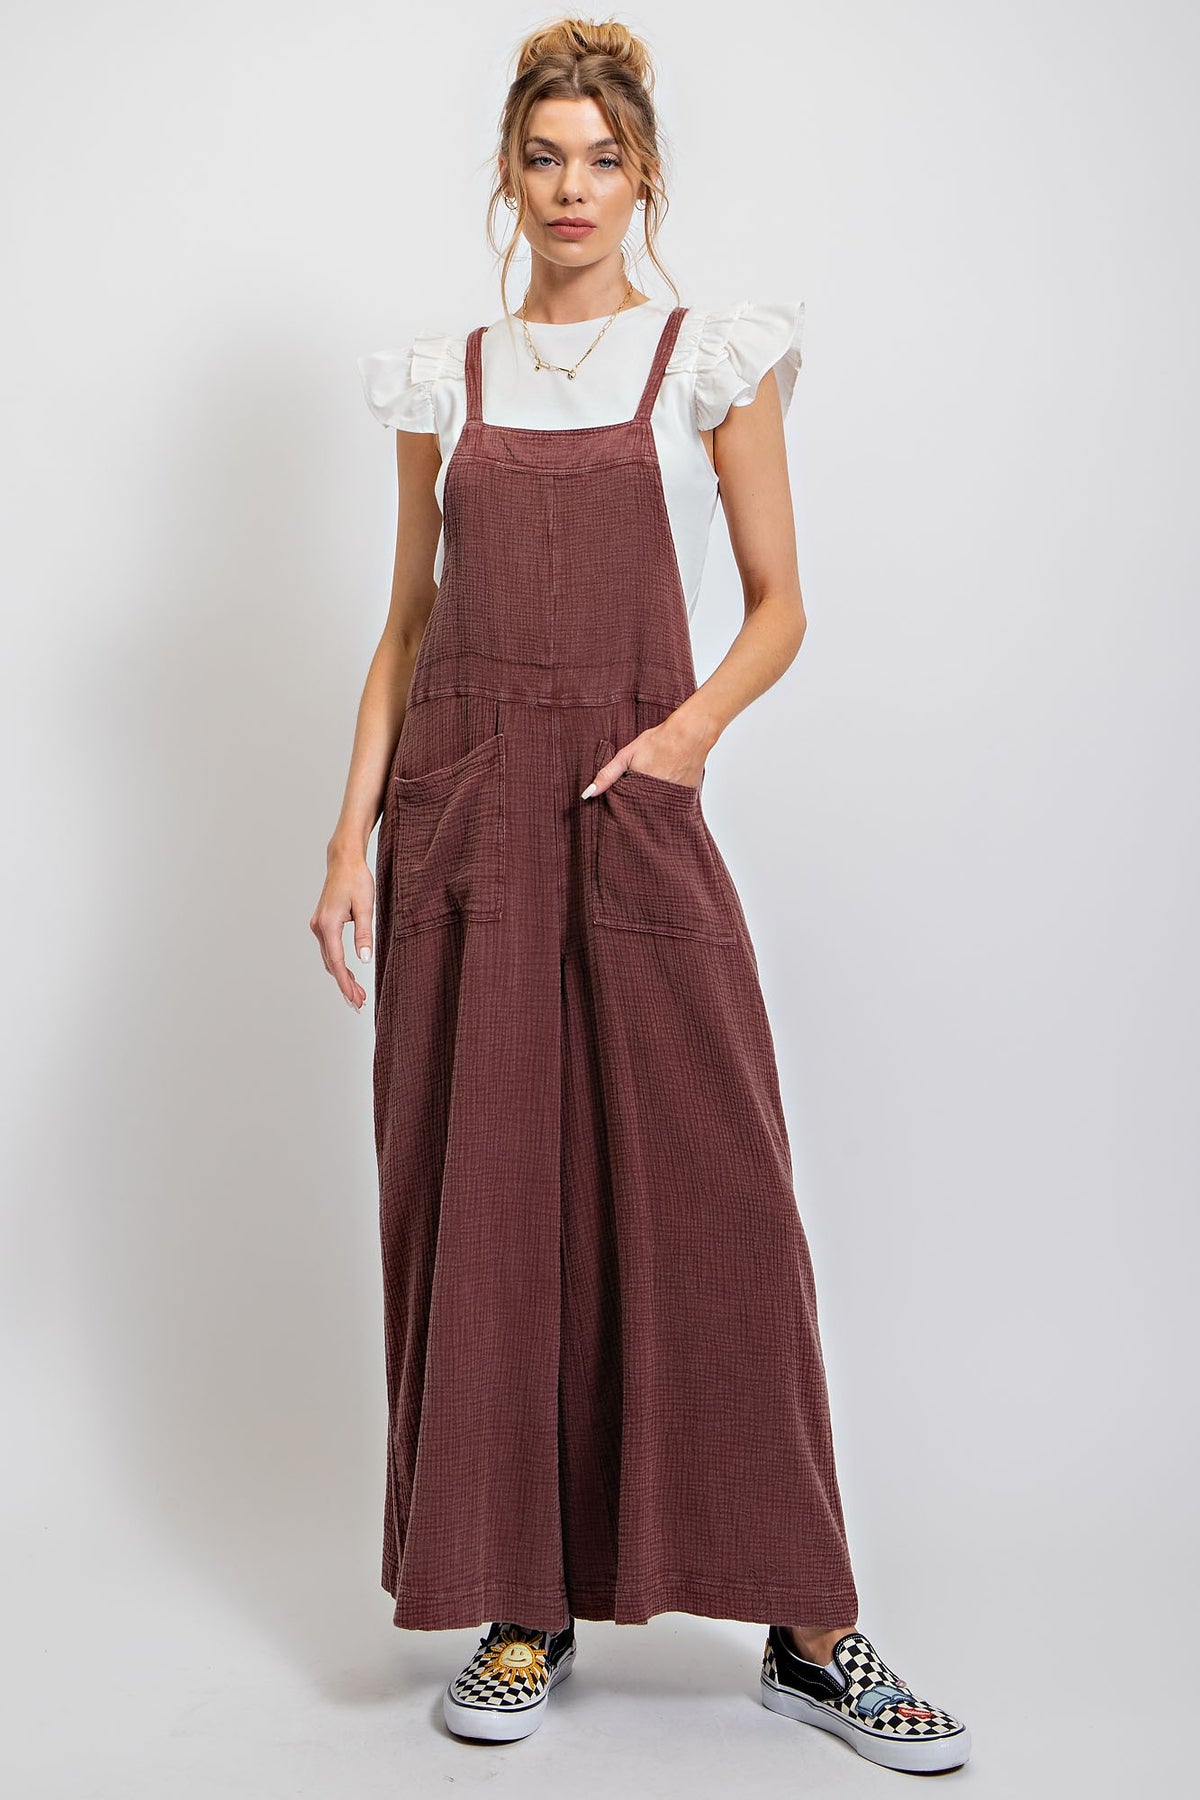 Plum Mineral Washed Linen Overalls